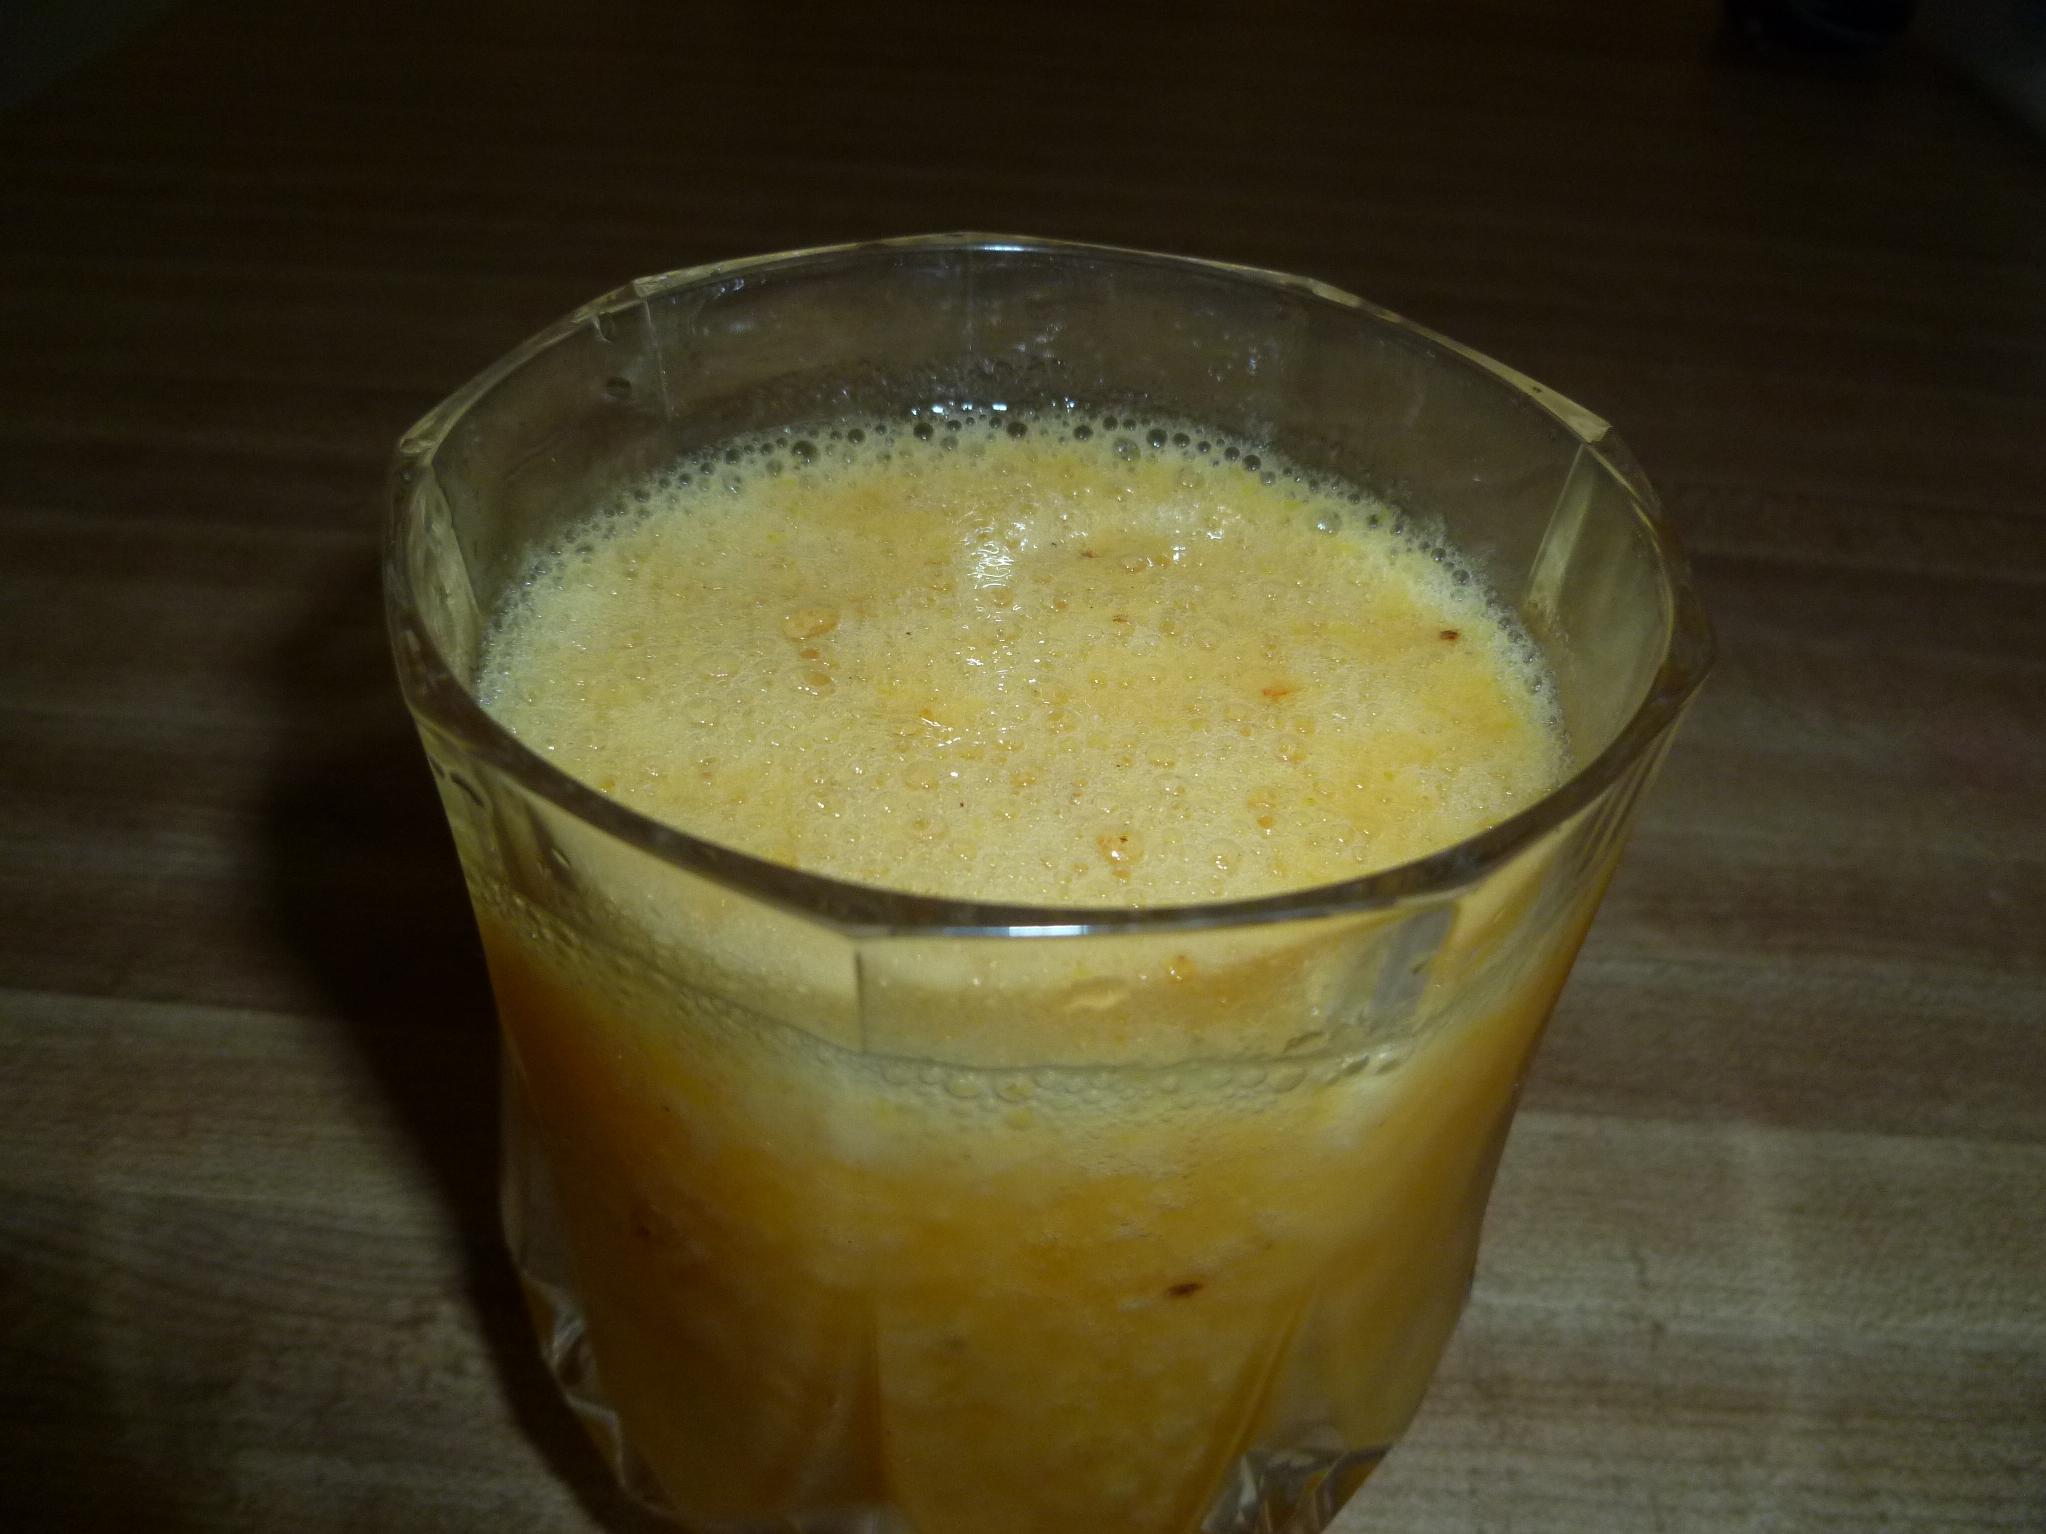 Refreshing Carambola Juice Recipe for a Hot Summer Day